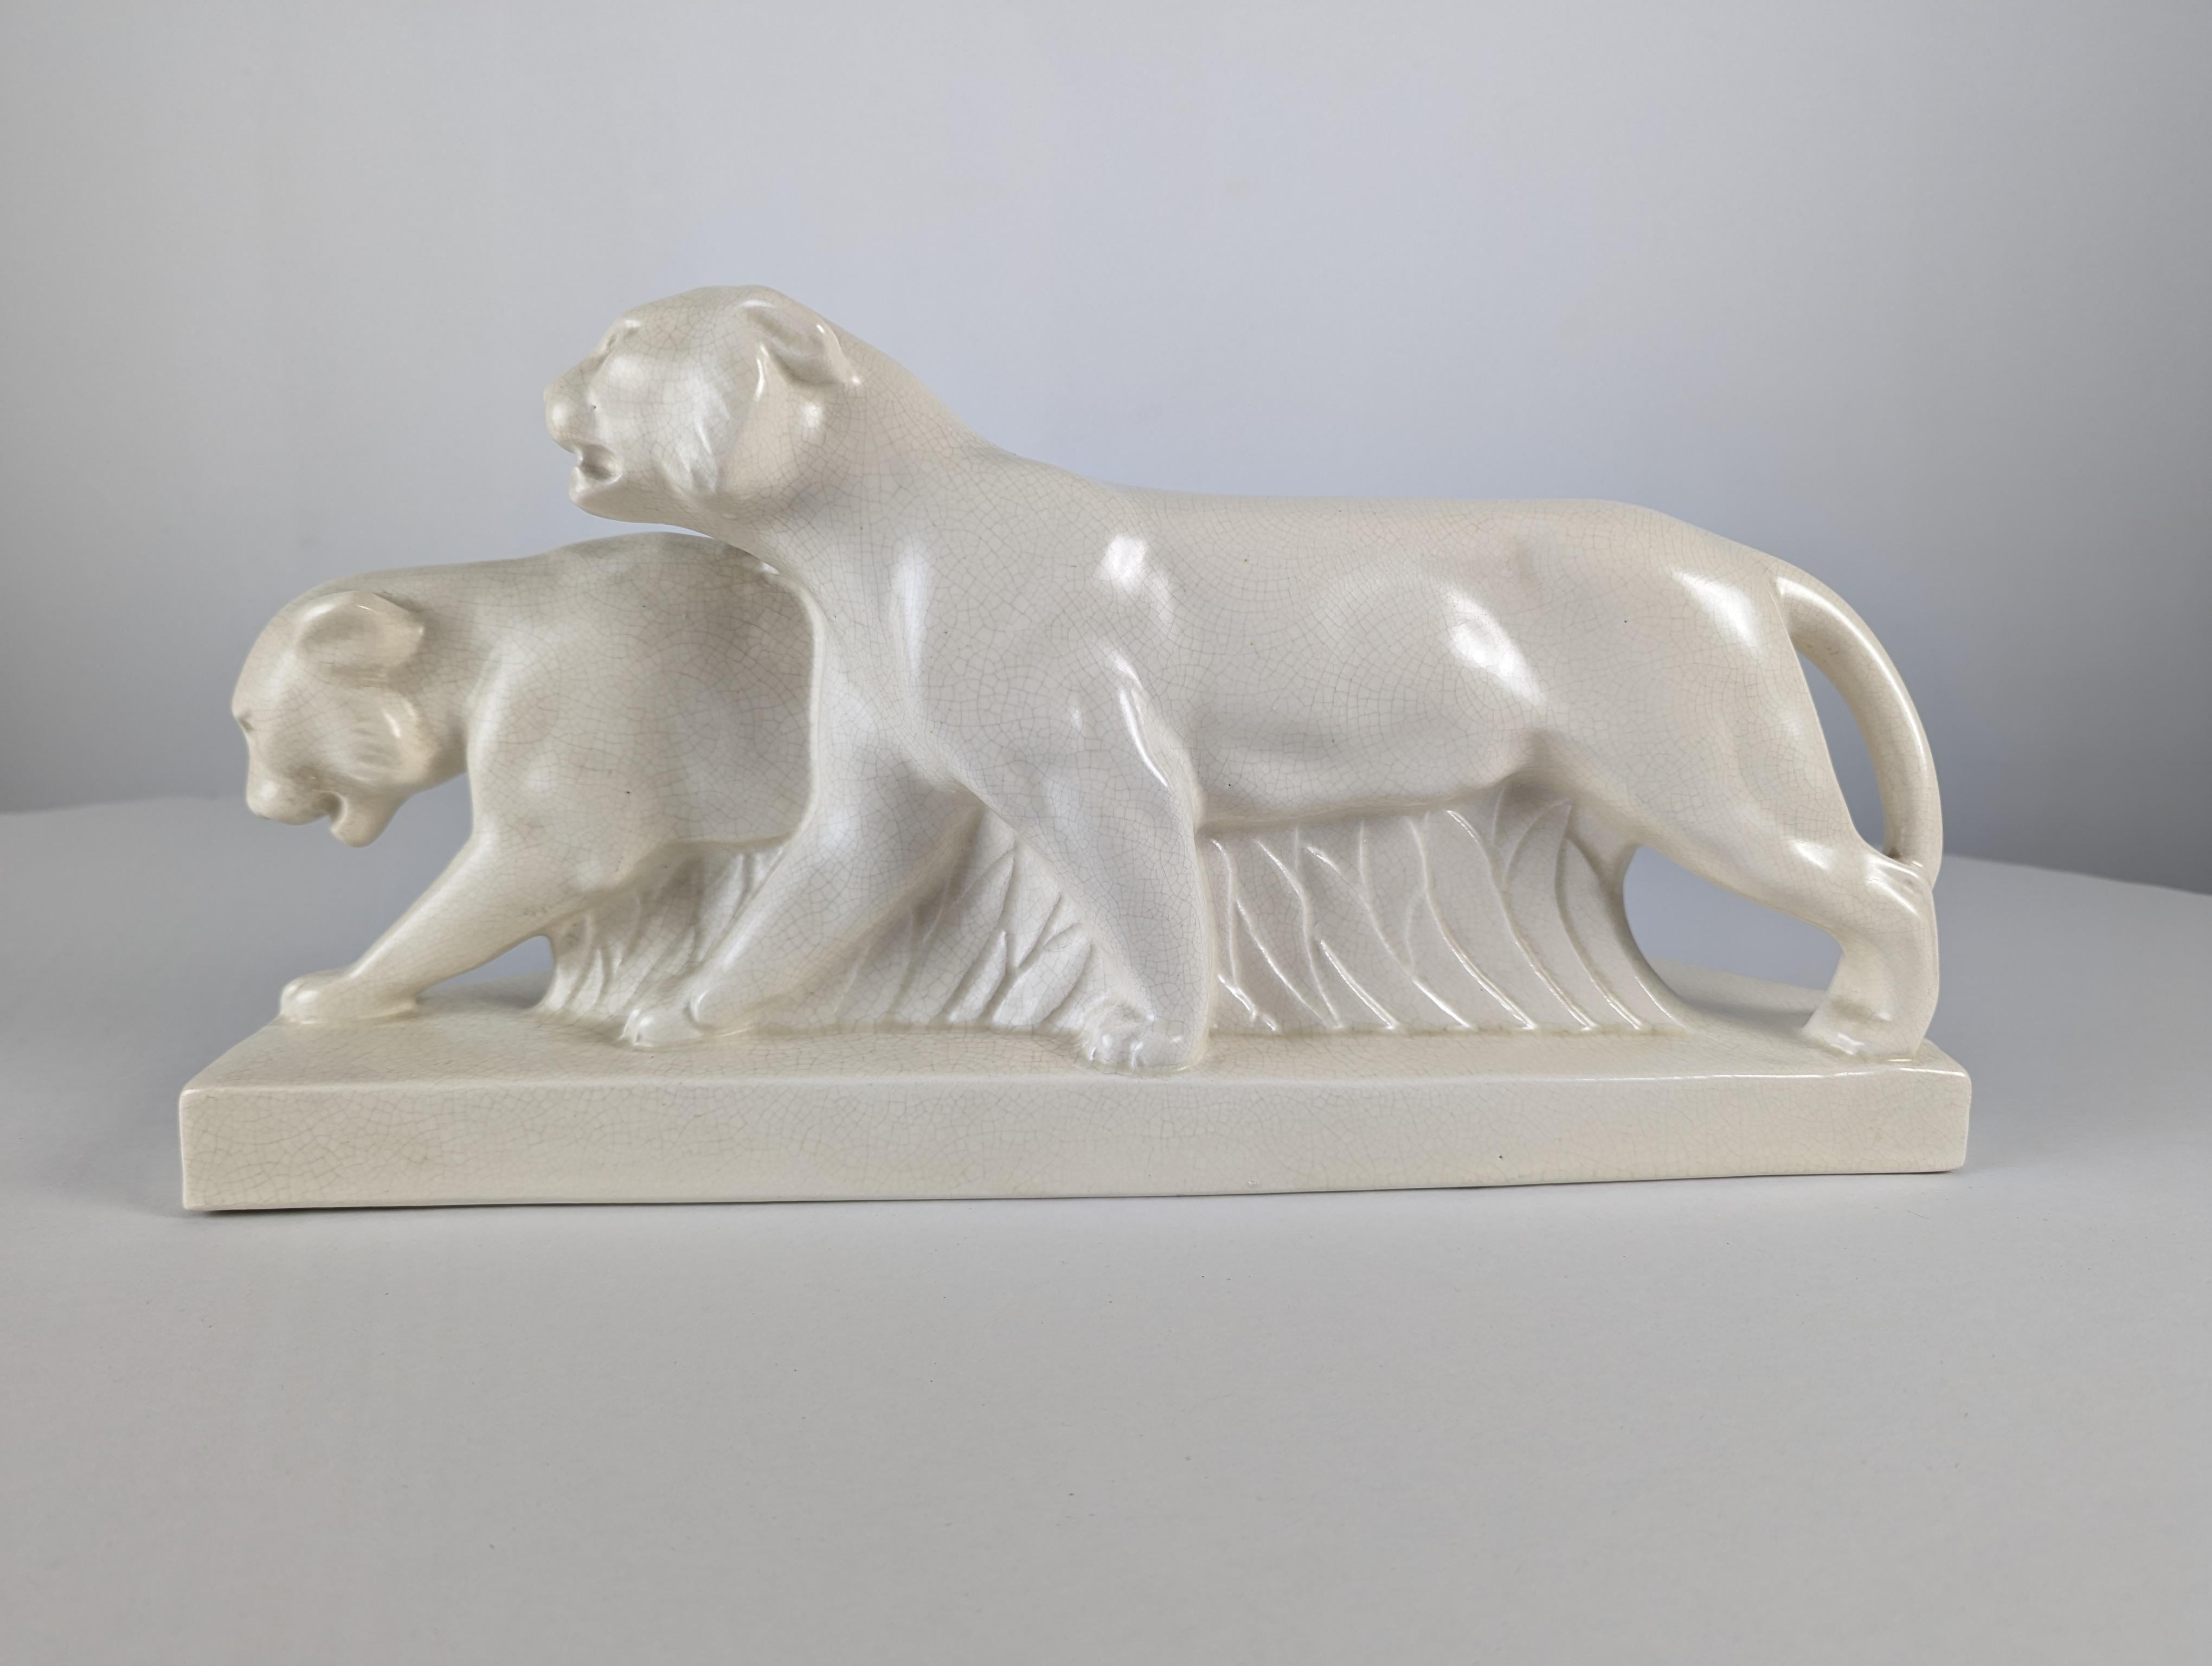 Spectacular piece of cracked ceramic that captures the essence of the Art Deco period. This stunning work of art features two stylized lionesses in full motion, evoking the grace and elegance characteristic of the era. The crackle effect on the